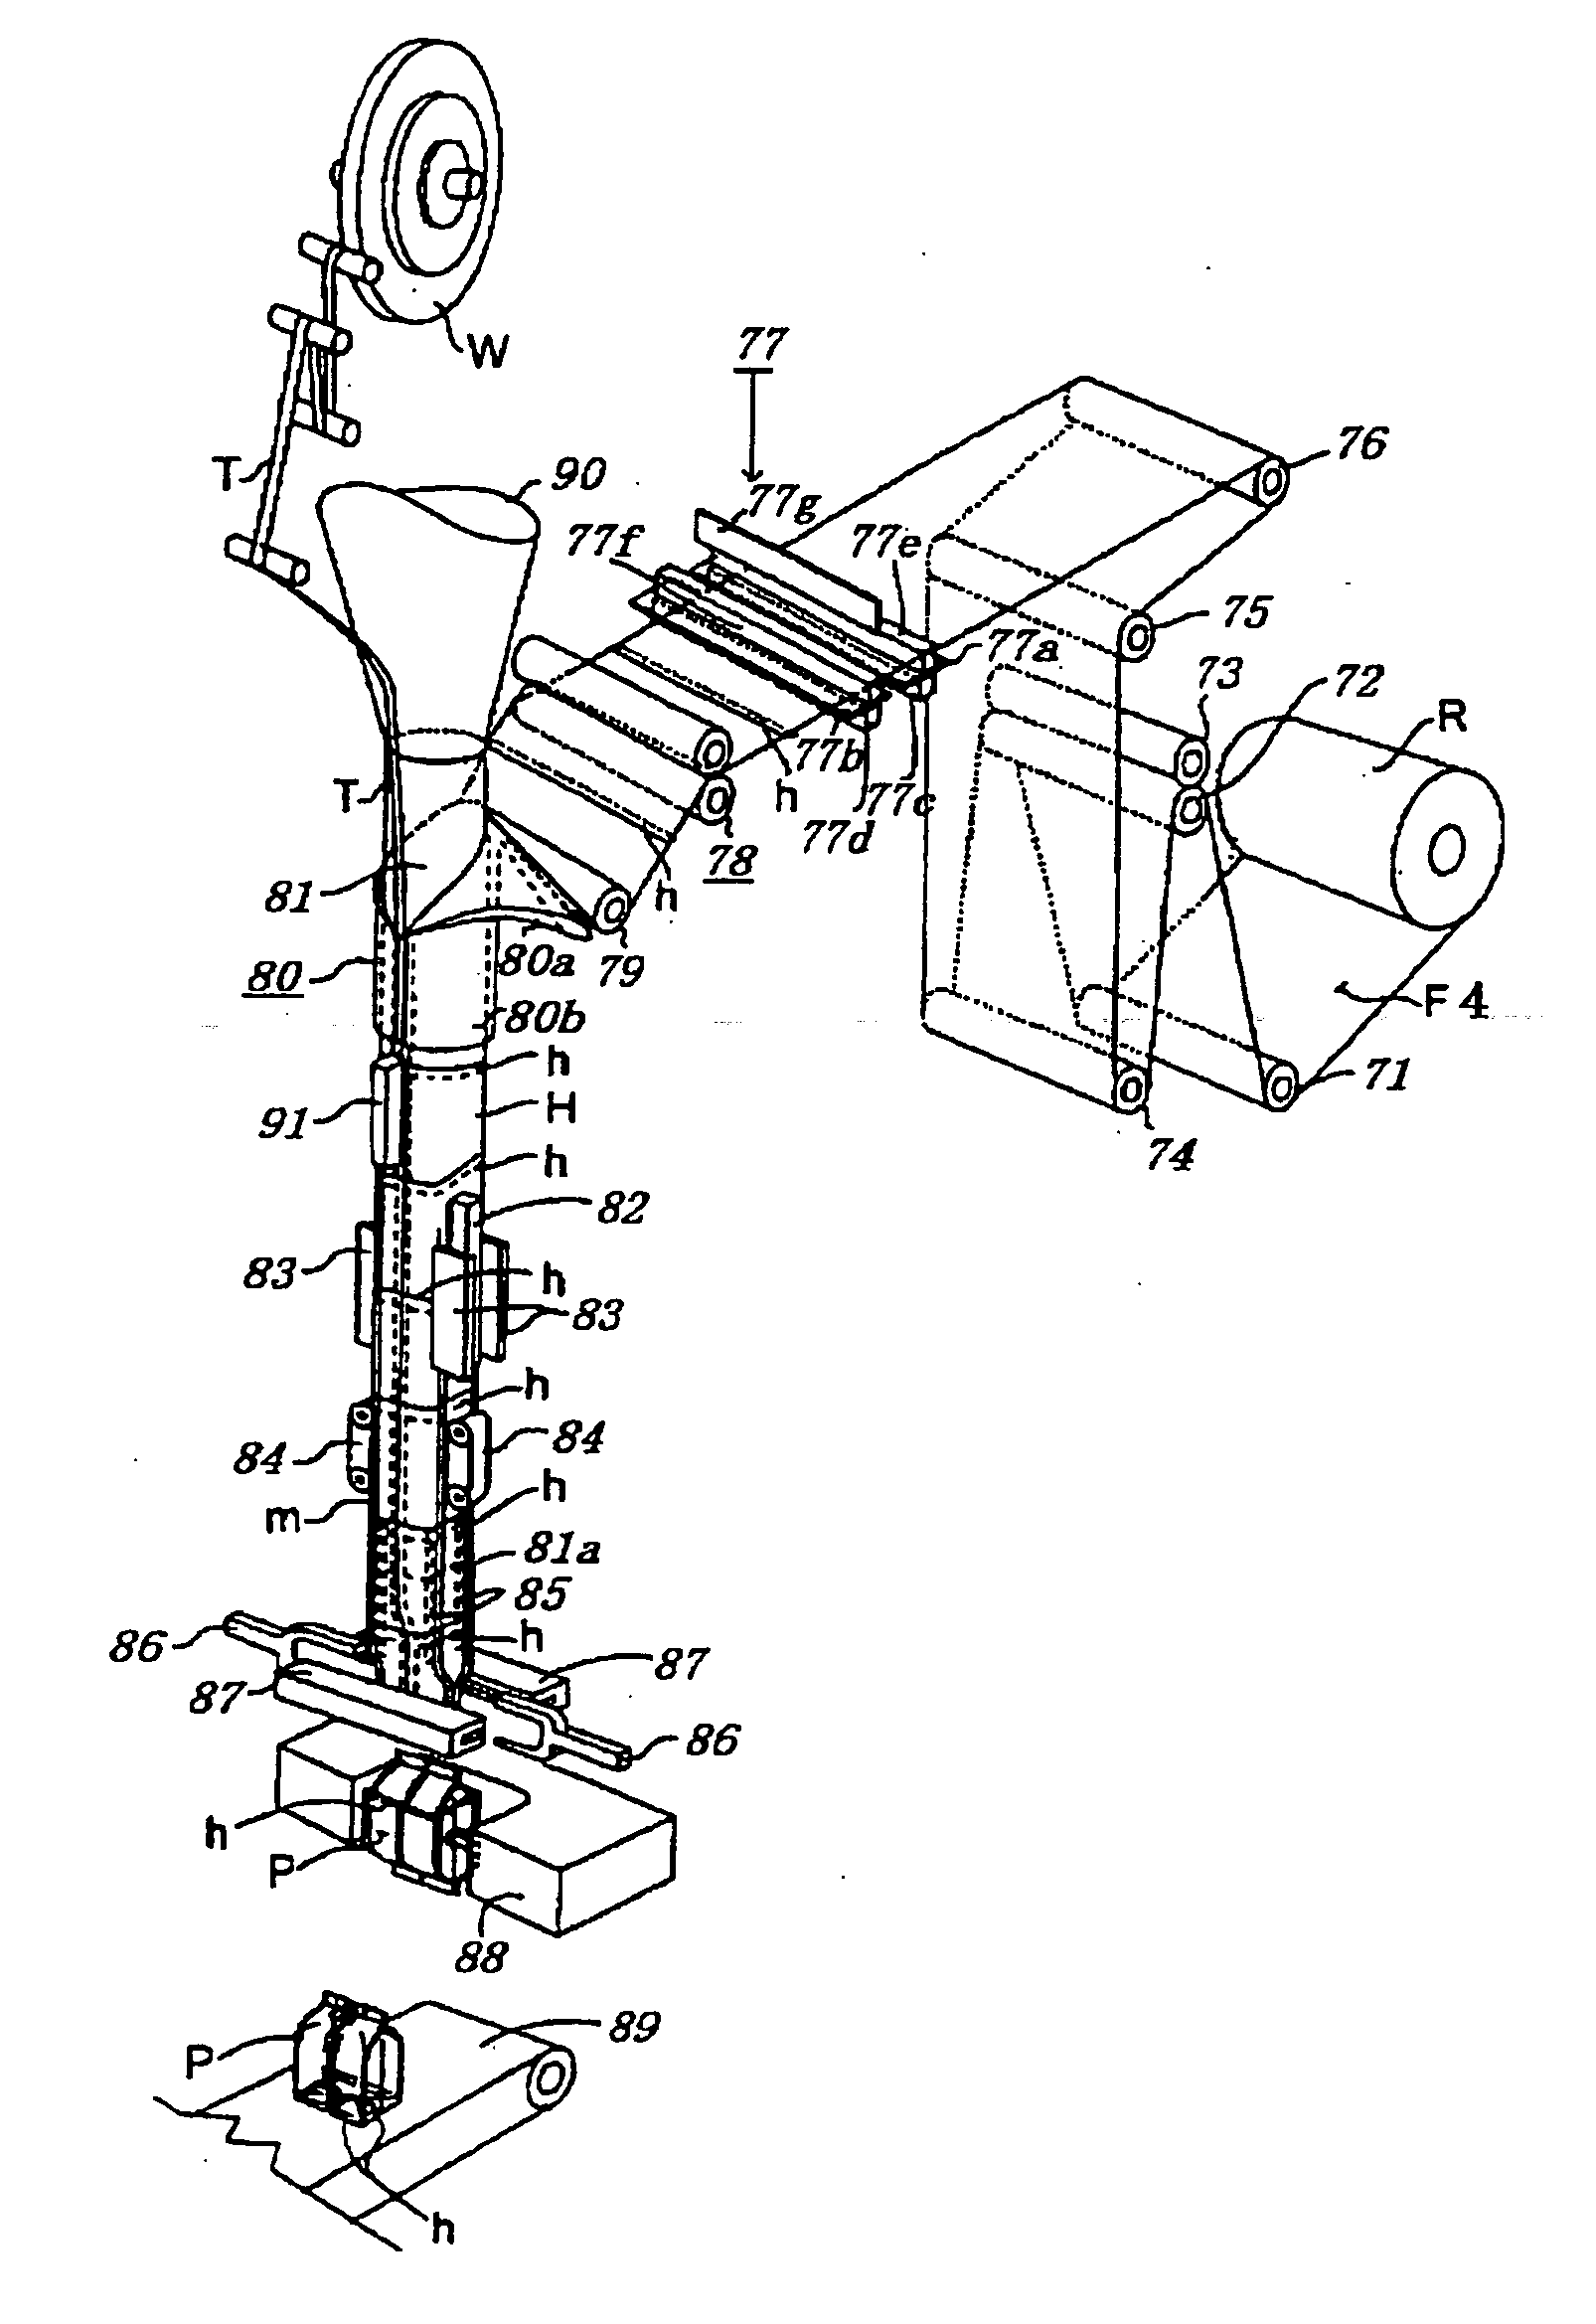 Self-standing packaging bag, packaging body, web roll, and manufacturing method therefor